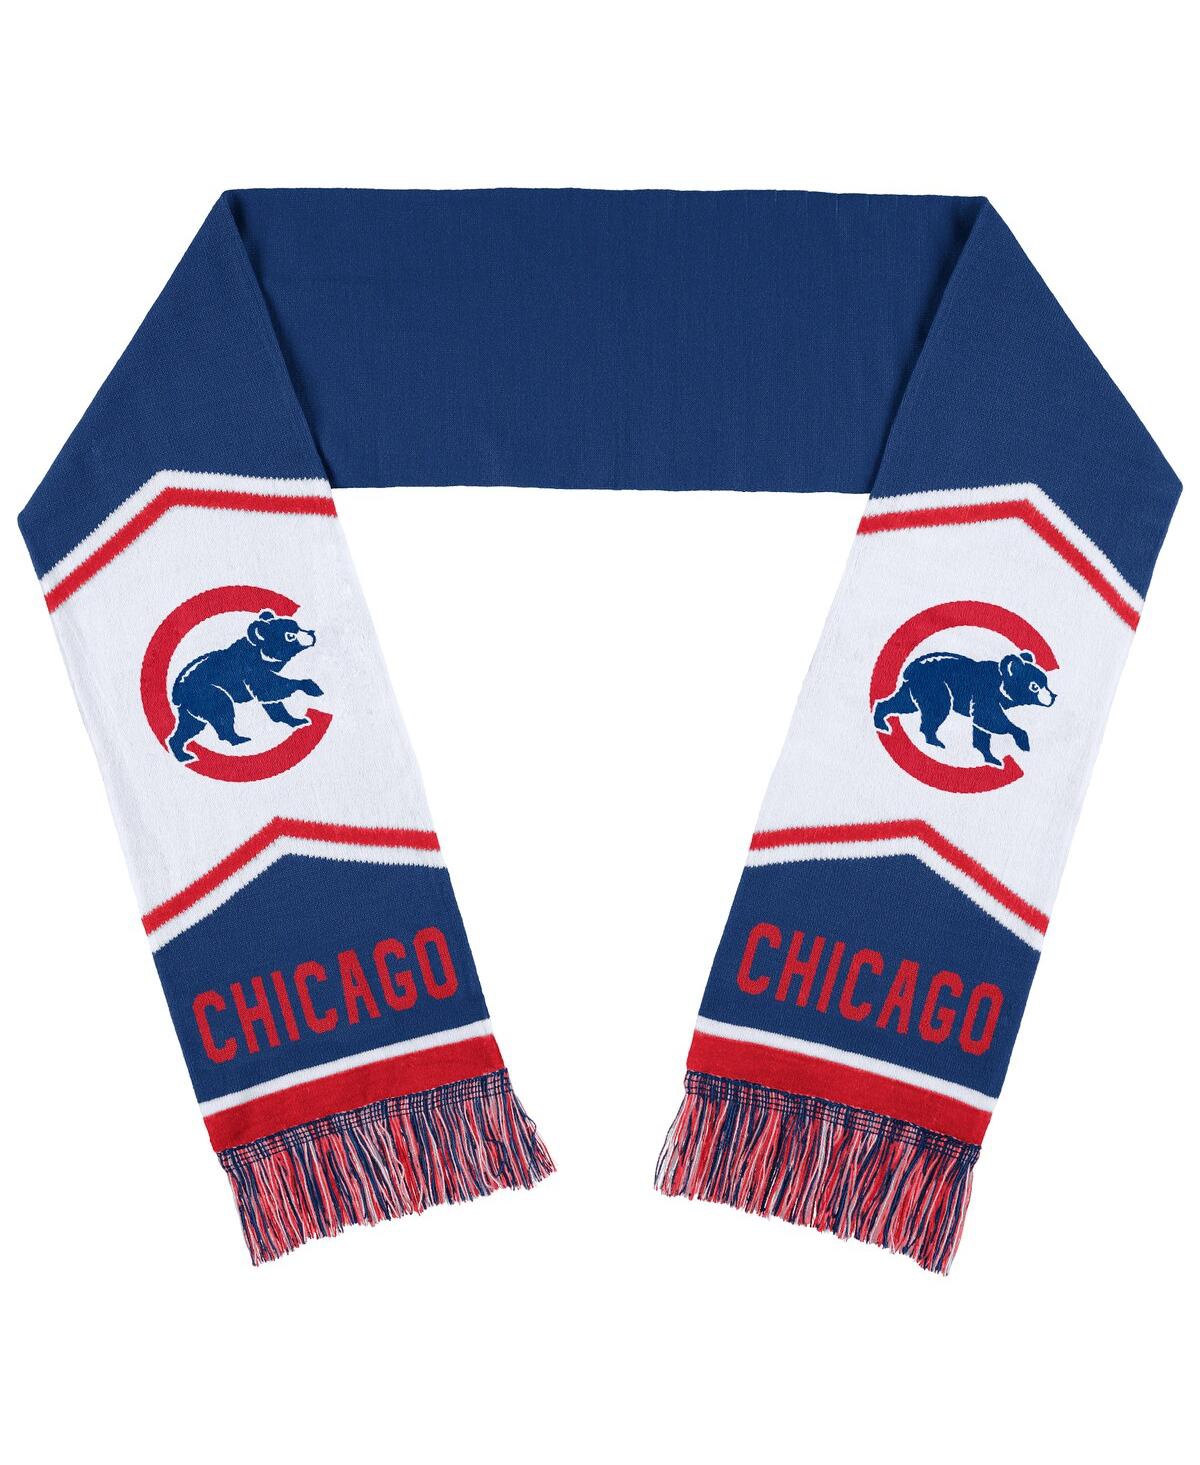 Women's Wear by Erin Andrews Chicago Cubs Jacquard Stripe Scarf - Blue